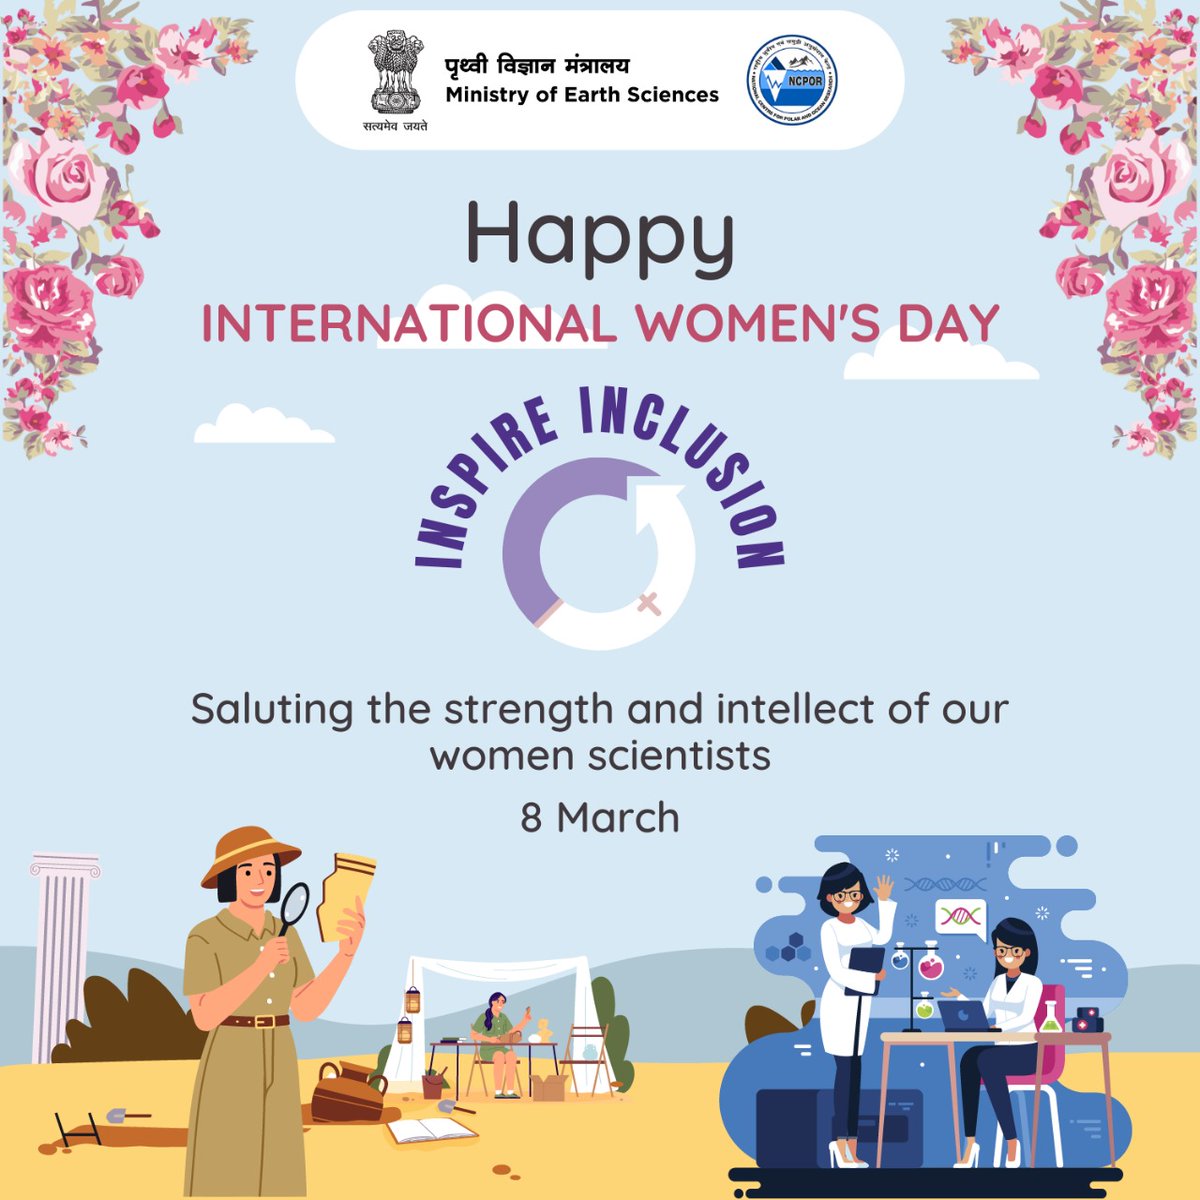 NCPOR #Goa wishes all #women scientists and researchers a Happy #InternationalWomensDay2024 Your dedication and grit in research & innovations have contributed to the nation’s growth. #InspireInclusion #WomensDay #WomenInScience @moesgoi @TMeloth